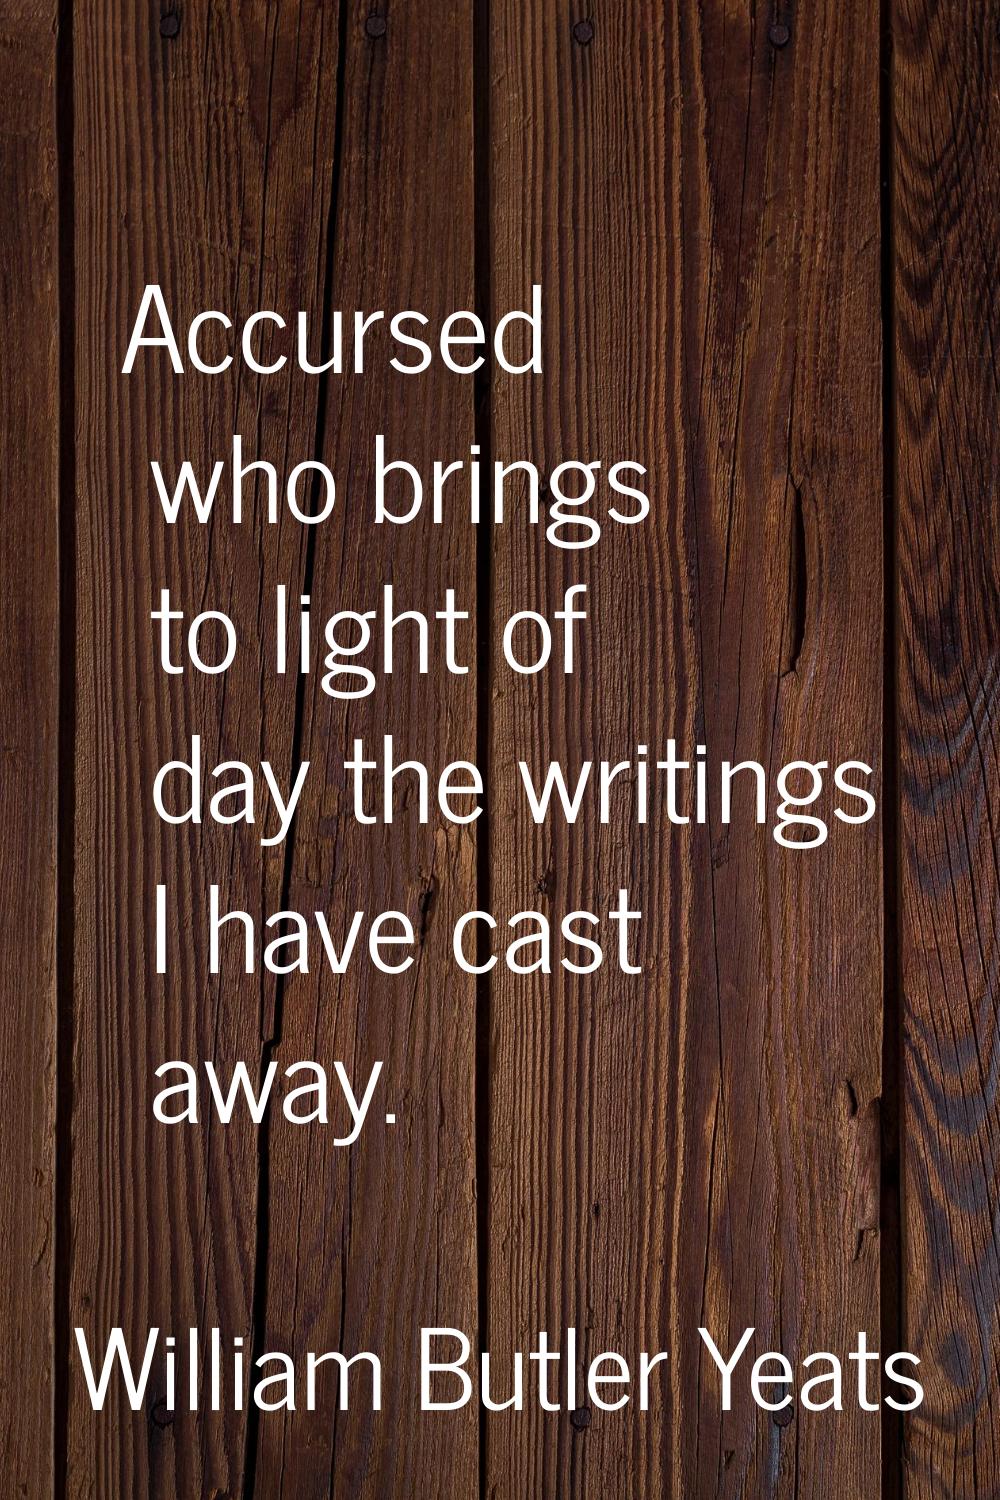 Accursed who brings to light of day the writings I have cast away.